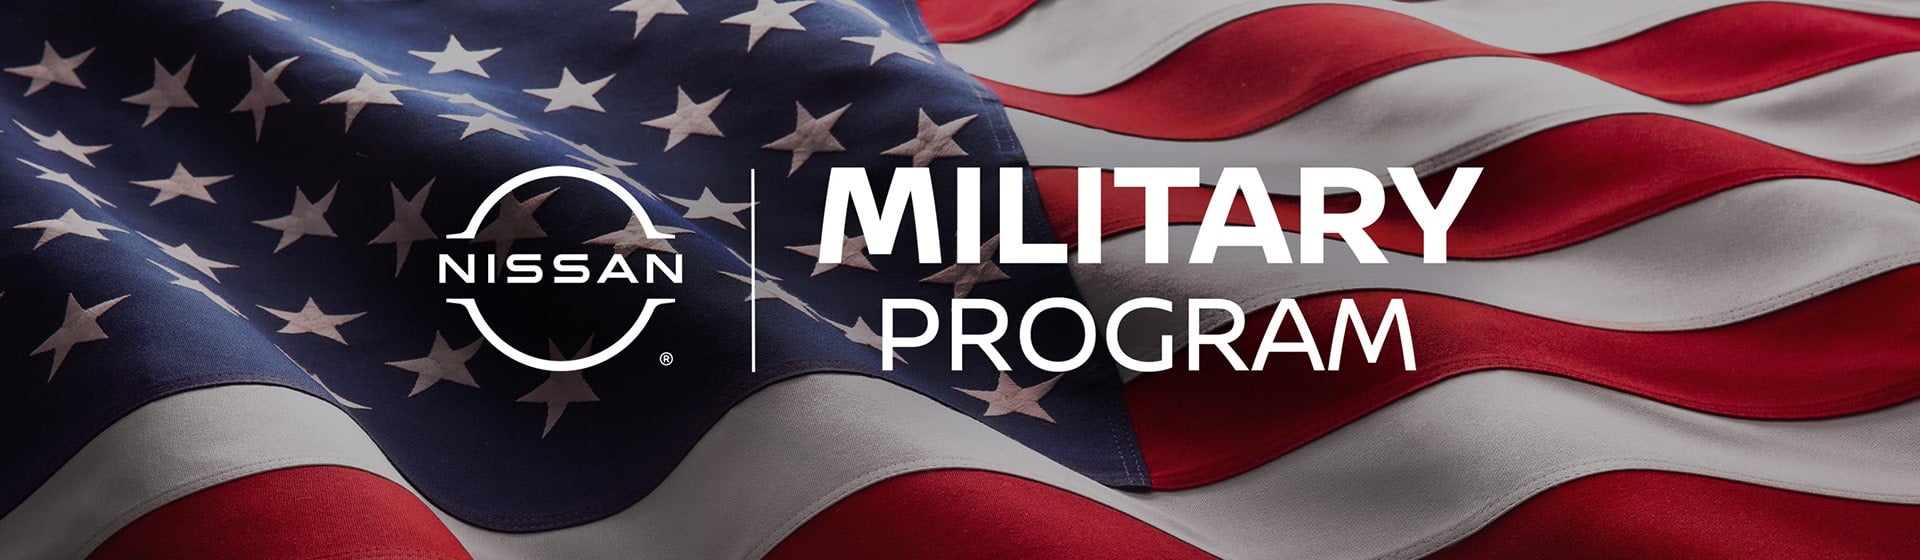 Nissan Military Discount | Taylor's Auto Max Nissan in Great Falls MT